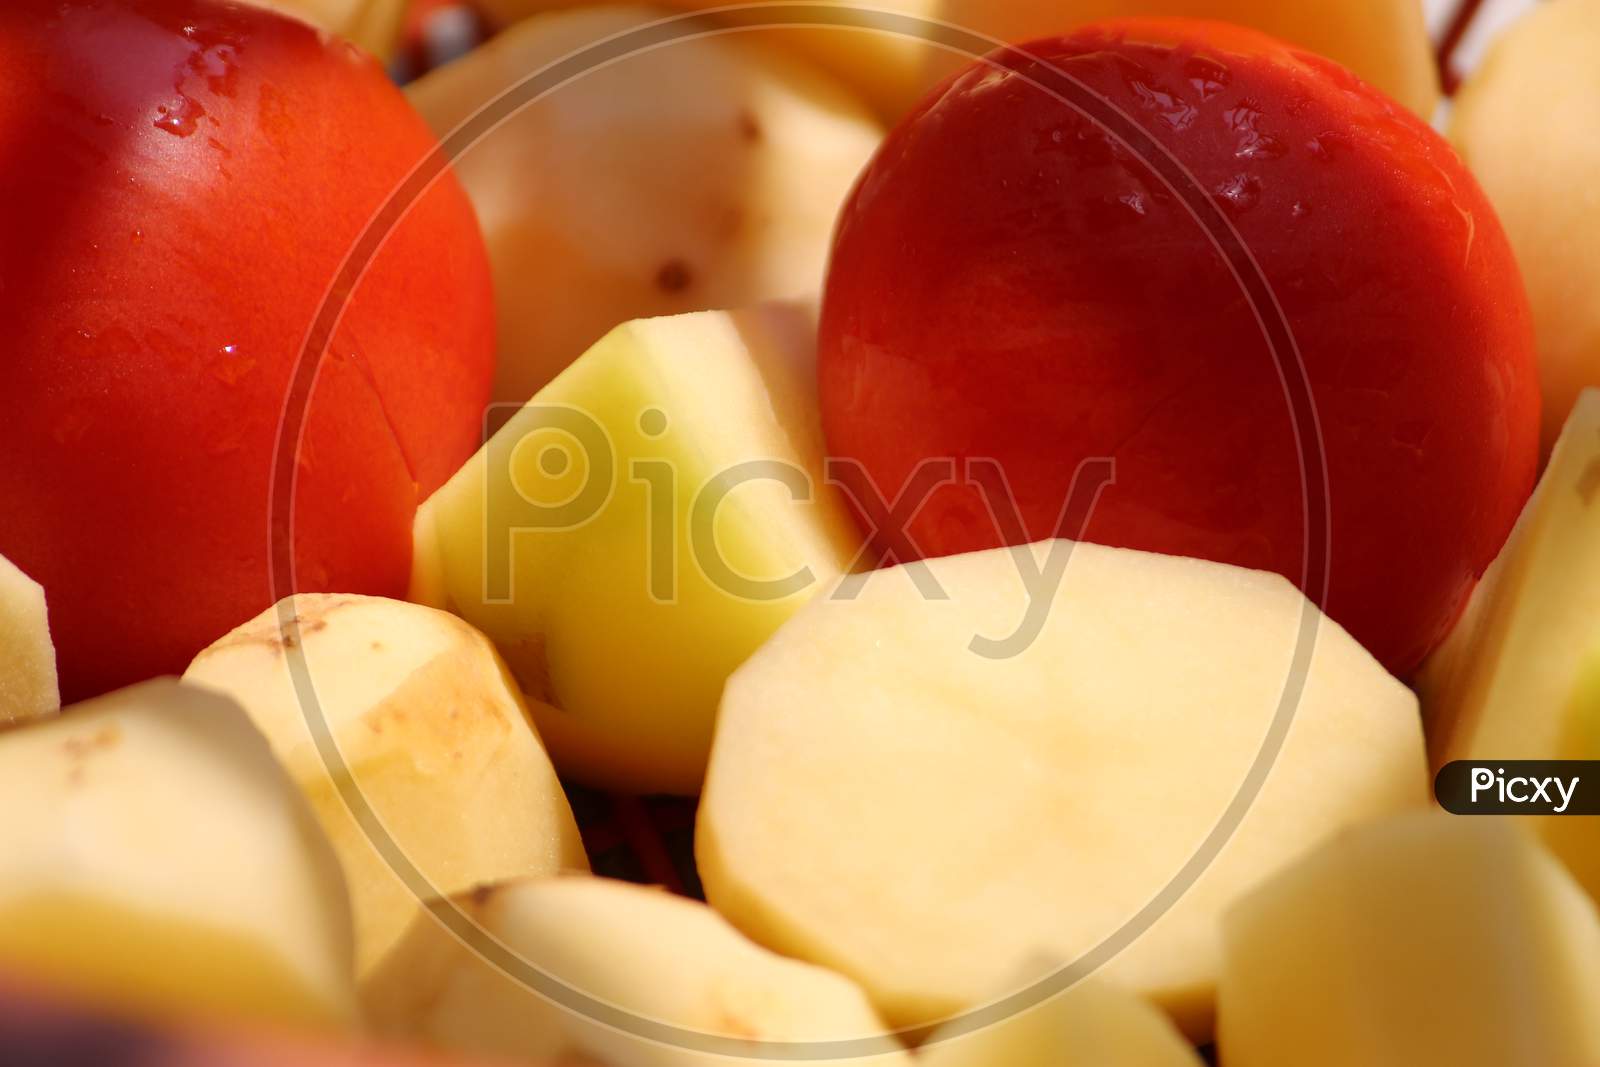 Chopped fresh potato pieces with red tomato together display ready to cook.